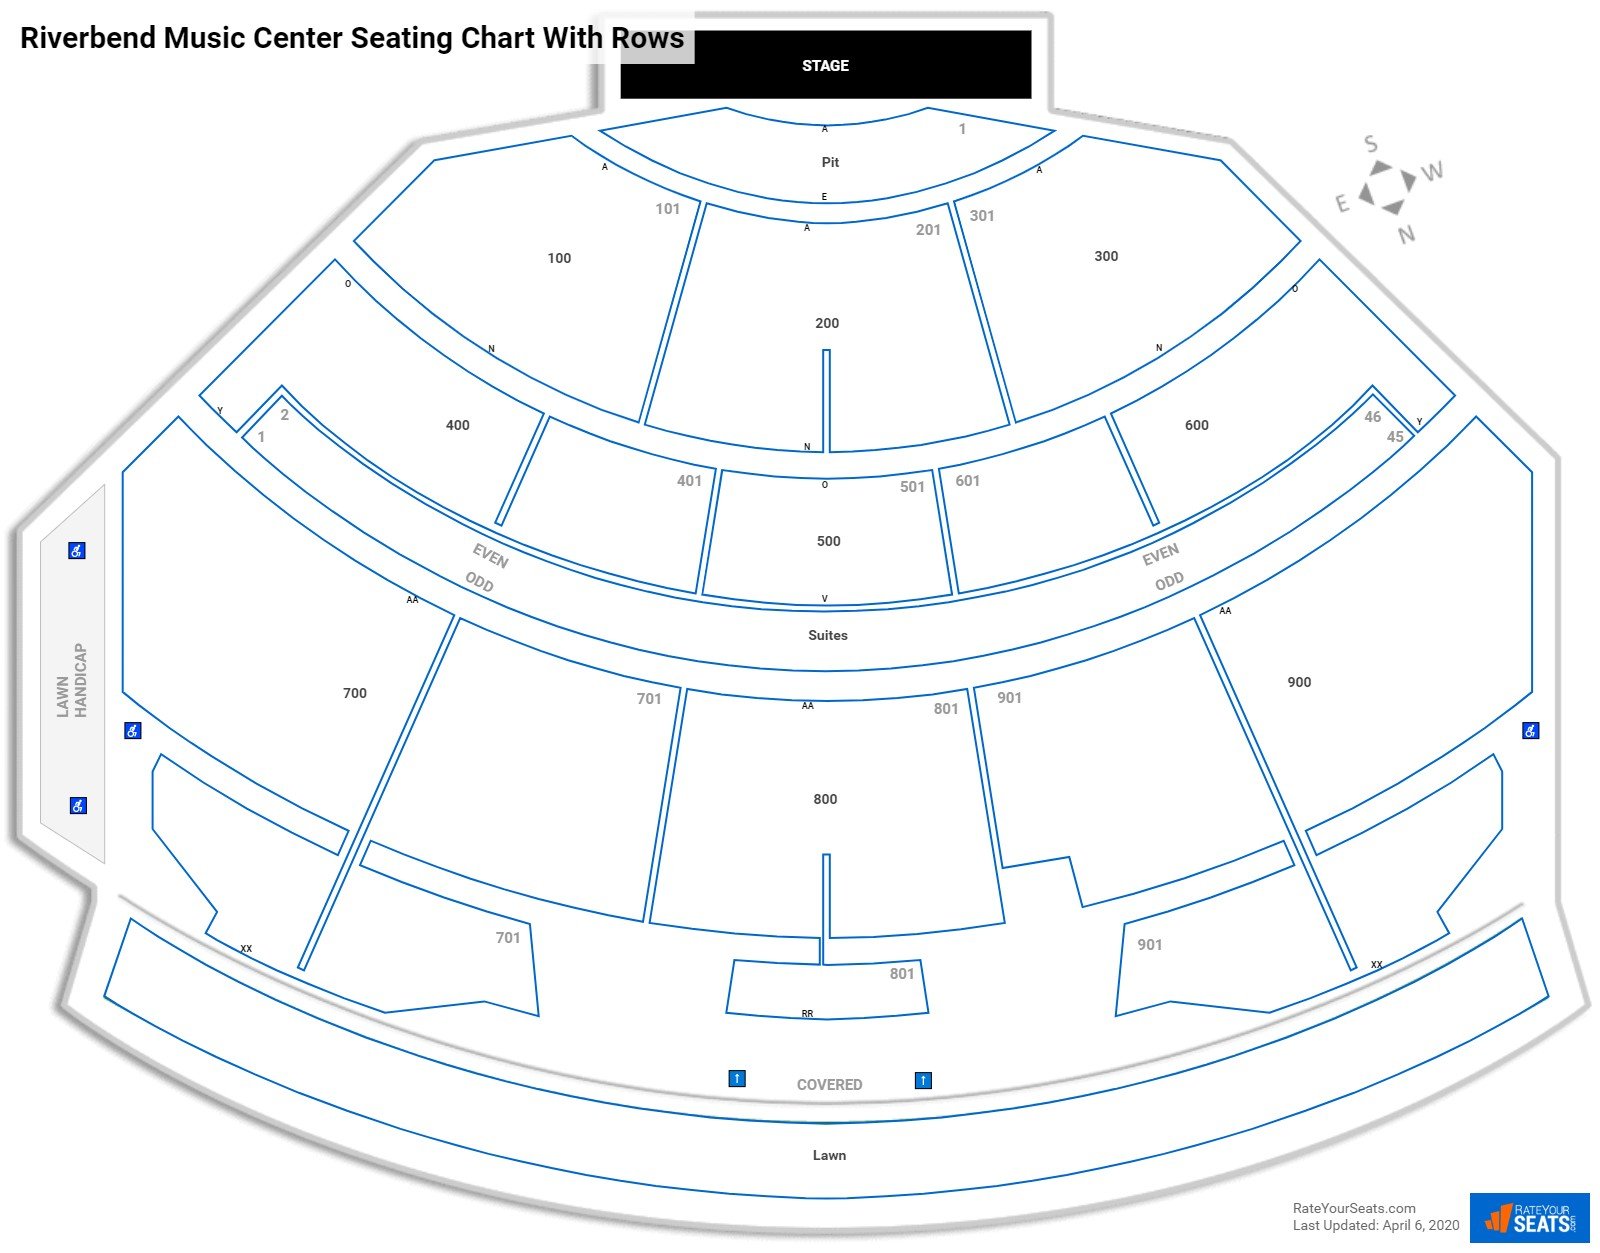 Riverbend Music Center seating chart with row numbers